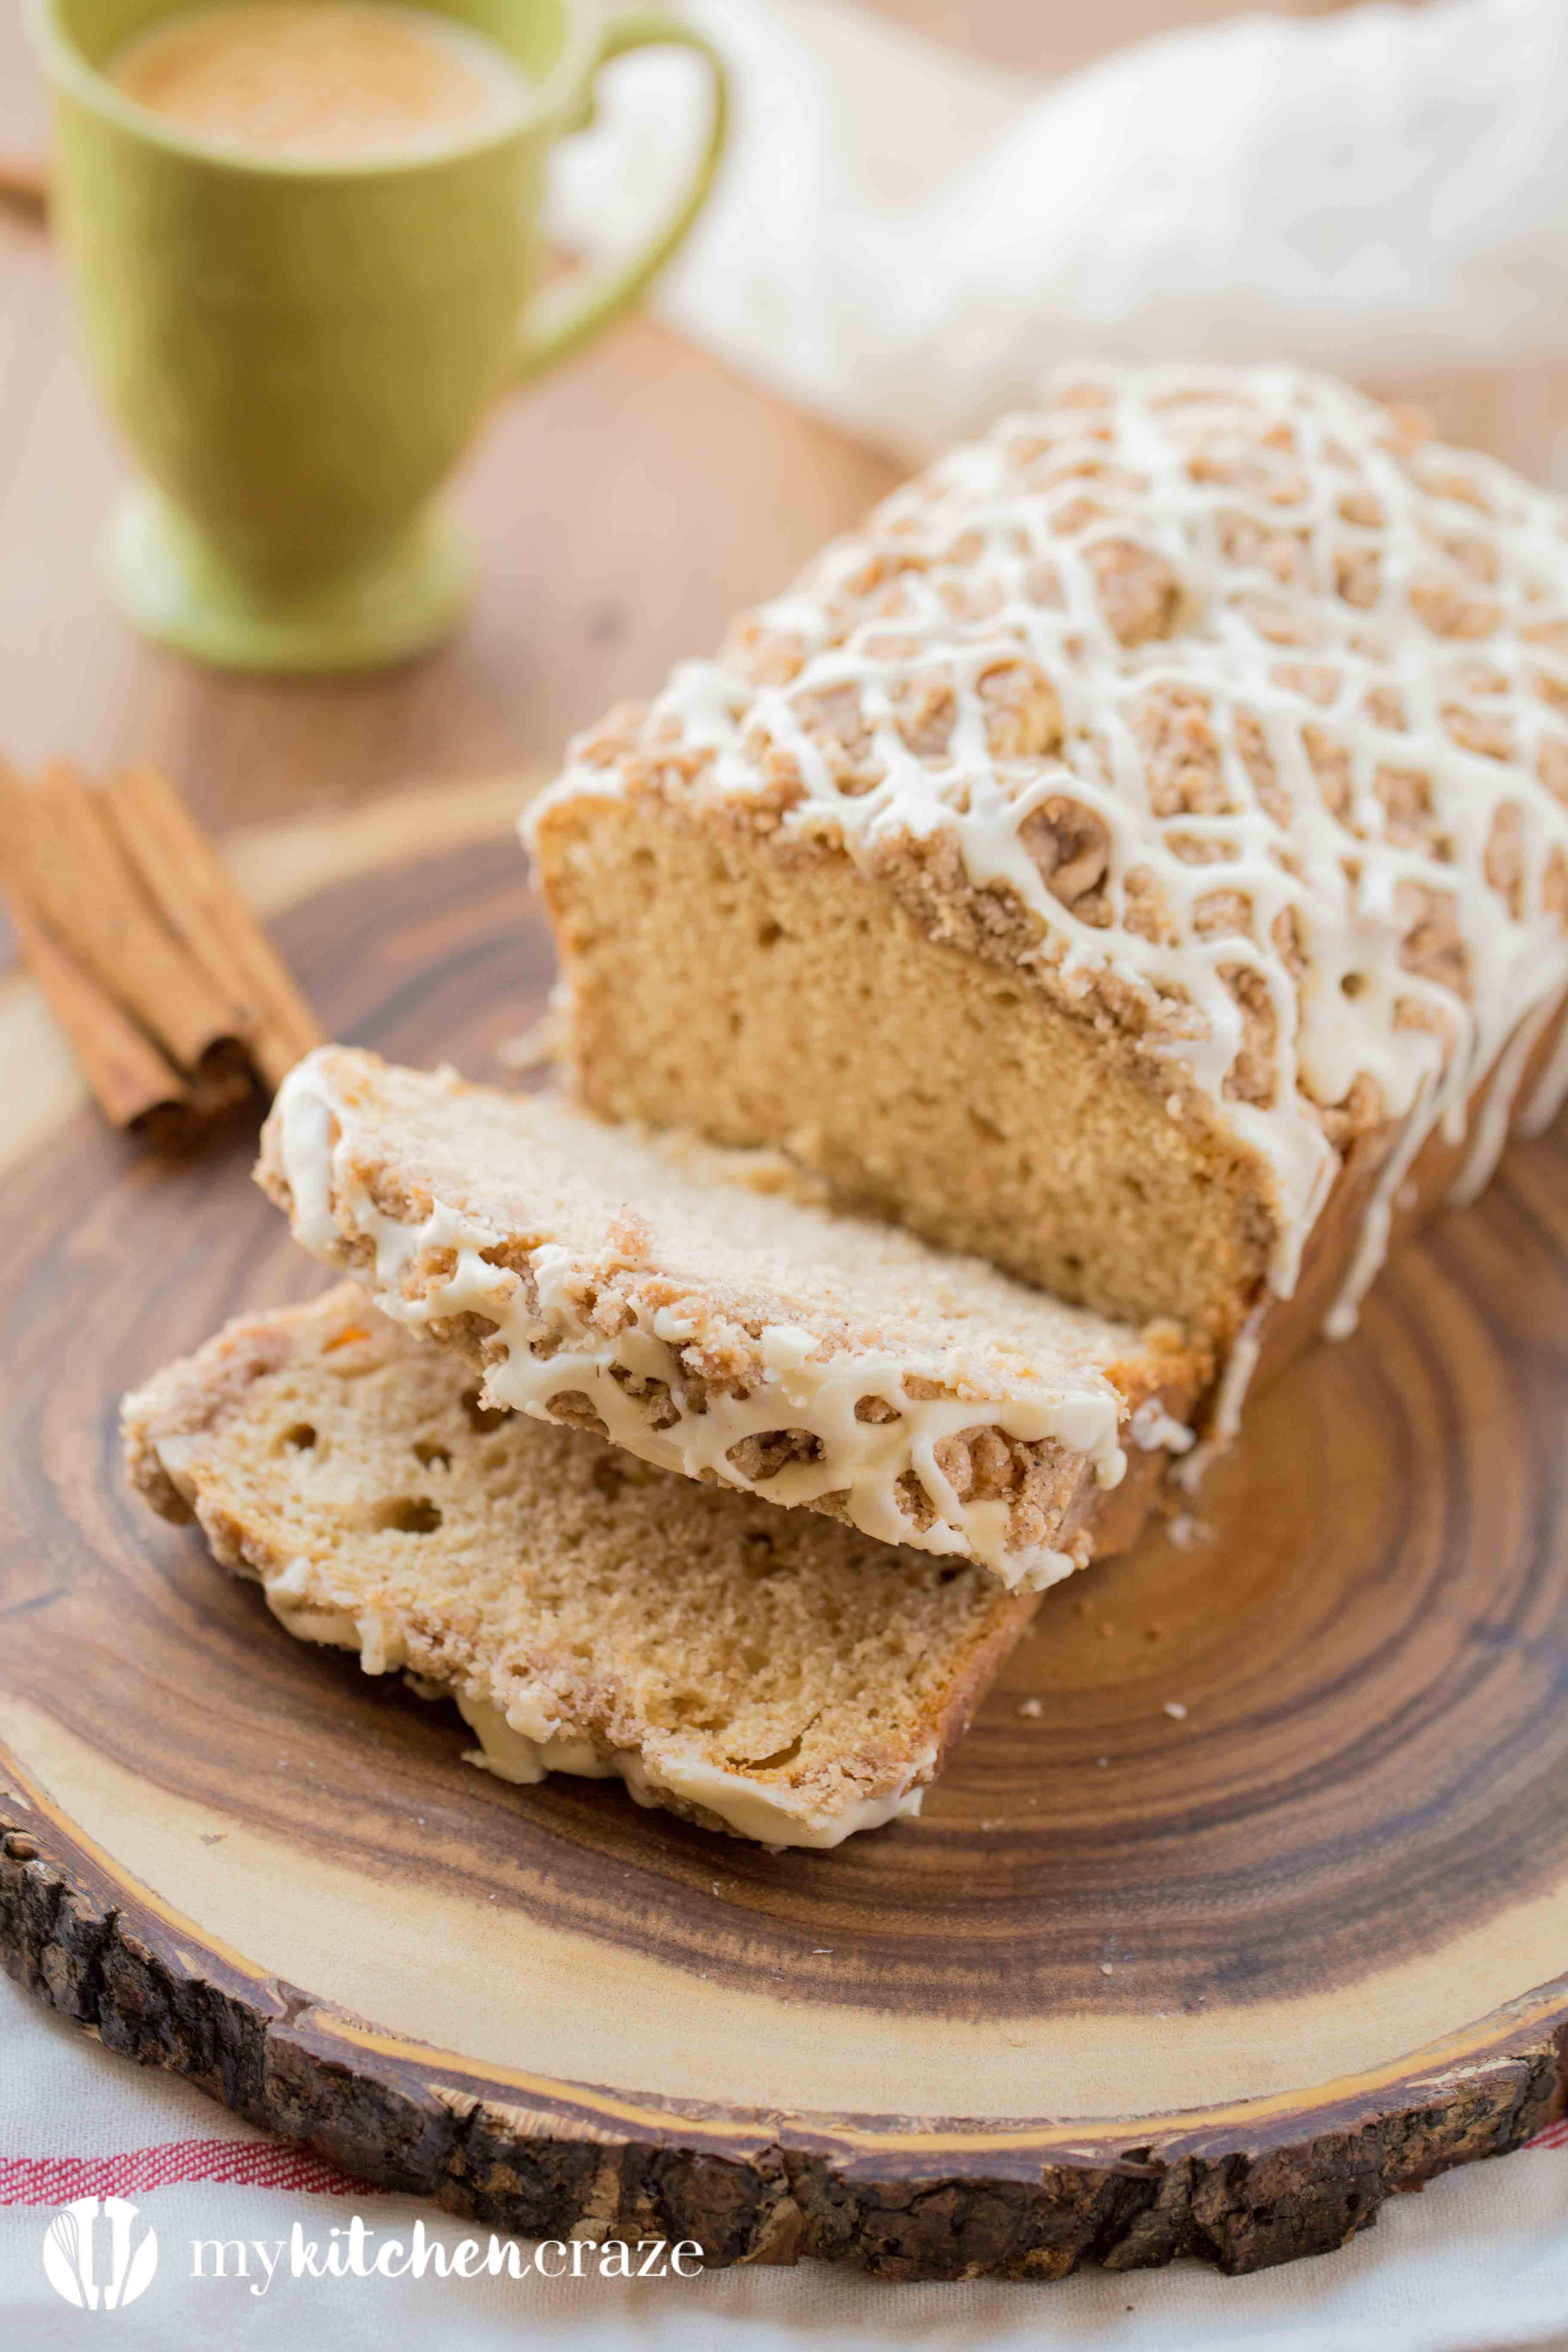 Eggnog Quick Bread should be on your holiday baking list this year! Moist and flavorful, this bread is a winner this season!